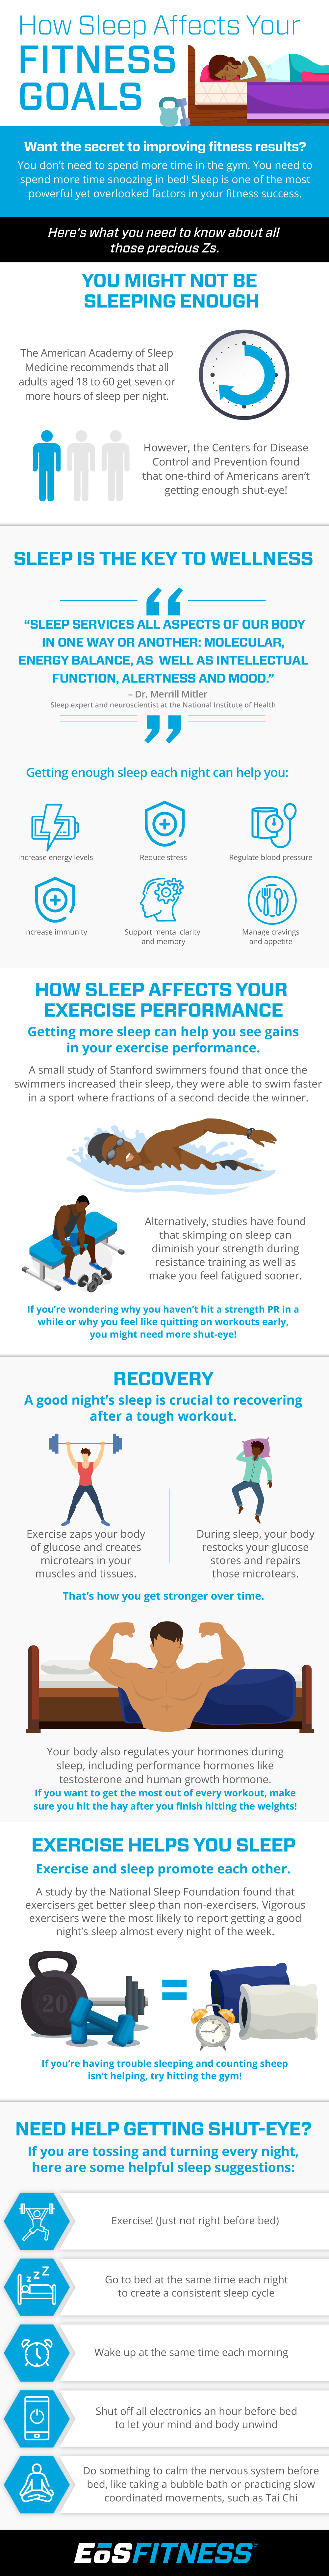 How Sleep Affects Your Fitness Goals. Want the secret to improving fitness results? You don't need to spend more time in the gym. You need to spend more time snoozing in bed! Sleep is one of the most powerful yet overlooked factors in your fitness success. Here's what you need to know about all those precious Z's. You might not be sleeping enough. The American Academy of Sleep Medicine recommends that all adults aged 18 to 60 get seven or more hours of sleep per night. However, the Centers for Disease Control and Prevention found that one-third of Americans aren't getting enough shut-eye! Sleep is the key to wellness. "sleep services all aspects of our body in one way or another: molecular, energy balance, as well as intellectual function, alertness and mood."- Dr. Merrill Mitler (sleep expert and neuroscientist at the National Institute of Health). Getting enough sleep each night can help you: increase energy levels, reduce stress, regulate blood pressure, increase immunity, support mental clarity, manage cravings and appetite. How sleep affects your exercise performance- getting more sleep can help you see gains in your exercise performance. A small study of Stanford swimmers found that once the swimmers increased their sleep, they were able to swim faster in a sport where fractions of a second can decide the winner. Alternatively, studies have found that skimping on sleep can diminish your strength during resistance training as well as make you feel fatigues sooner. If you're wondering why you haven't hit a strength PR in a while or why you feel like quitting on workouts early, you might need more shut-eye! Recovery- A good night sleep is crutial to recovering after a tough workout. Exercise zaps your body of glucose and creates microtears in your muscles and issues. During sleep, your body restocks your glucose stores and repairs those microtears. That's how you get stronger over time. Your body also regulates your hormones during sleep, including performance hormones like testosterone and human growth hormone. If you want to get the most out of every workout, make sure you hit the hay after you finish hitting the weights! Exercise helps you sleep. Exercise and sleep promote each other. A study by the National Sleep Foundation fount that exercisers get better sleep than non-exercisers. Vigorous exercisers were the most likely to report getting a good night's sleep almost every night of the week. If you're having trouble sleeping and counting sheep isn't helping, try hitting the gym! Need help getting shut-eye? If you are tossing and turning every night, here are some helpful sleep suggestions: Exercise! (just not right before bed), Go to bed at the same time each night to create a consistant sleep cycle, Wake u at the same time each morning, shut off all electronics an hour before bed to let your mind and body unwind, Do something to calm the nervous system before bed, like taking a bubble bath or practicing slow coordinated movements such as Tai Chi.